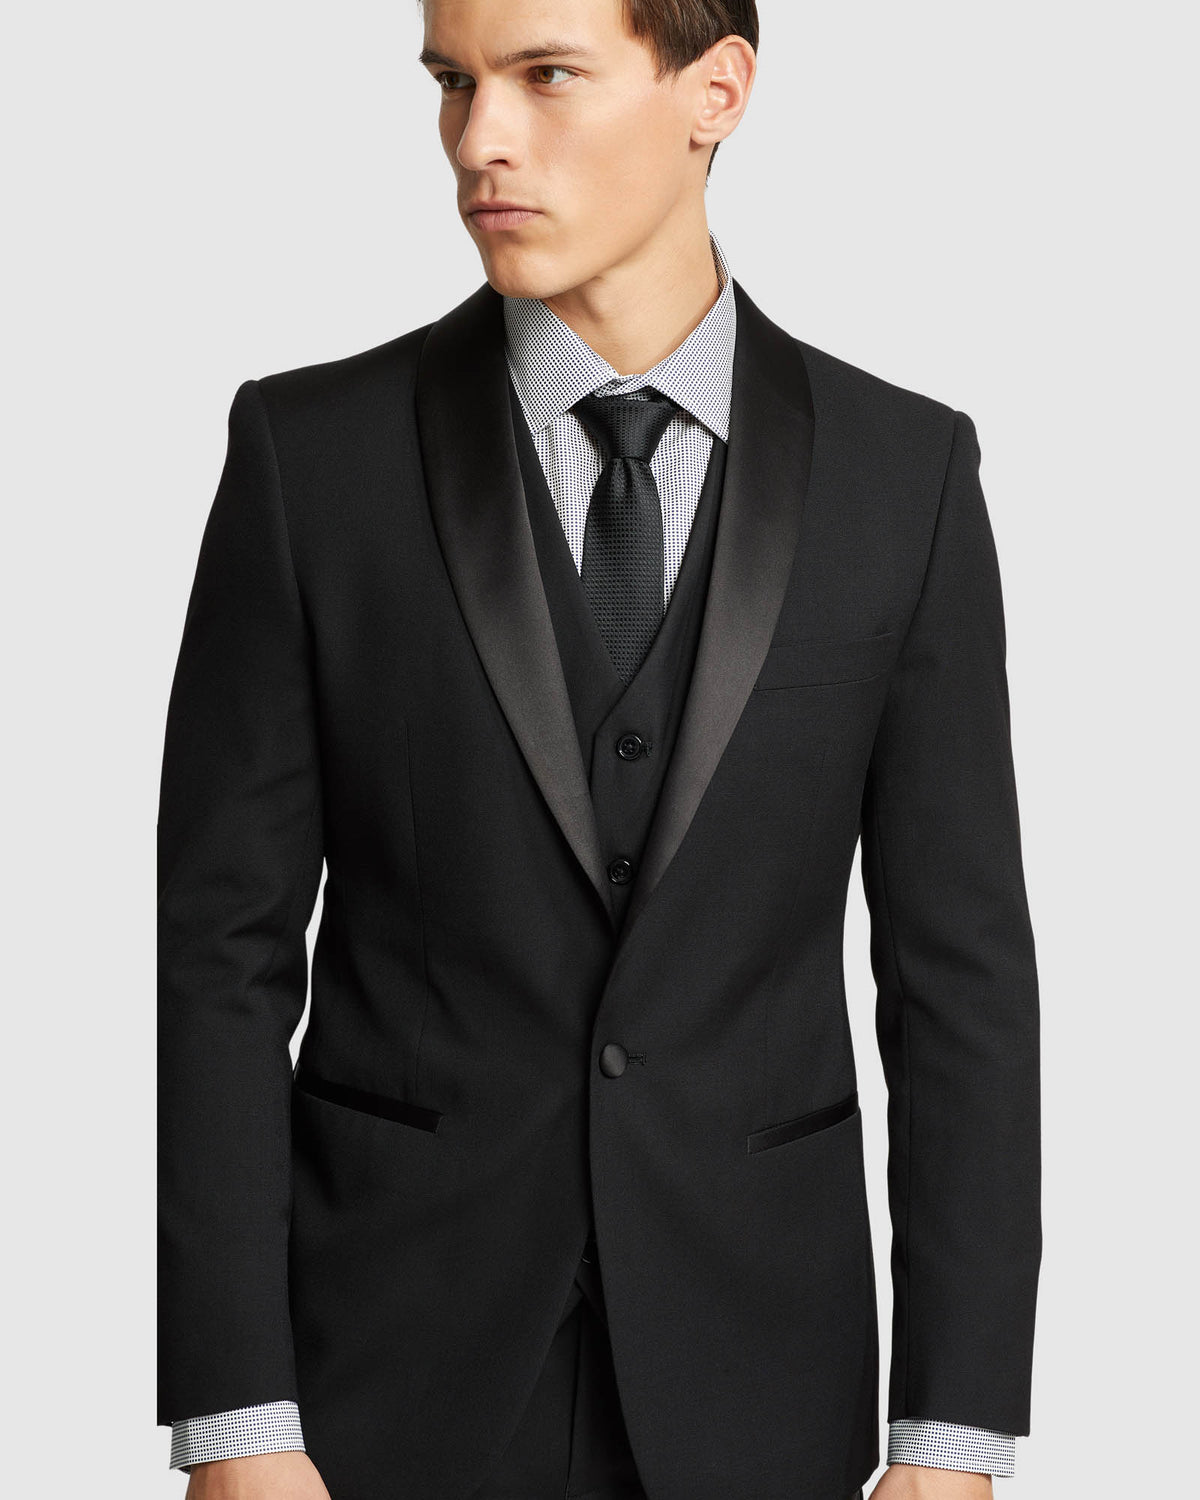 DINNER SUIT JACKET WITH SHAWL NECK MENS SUITS